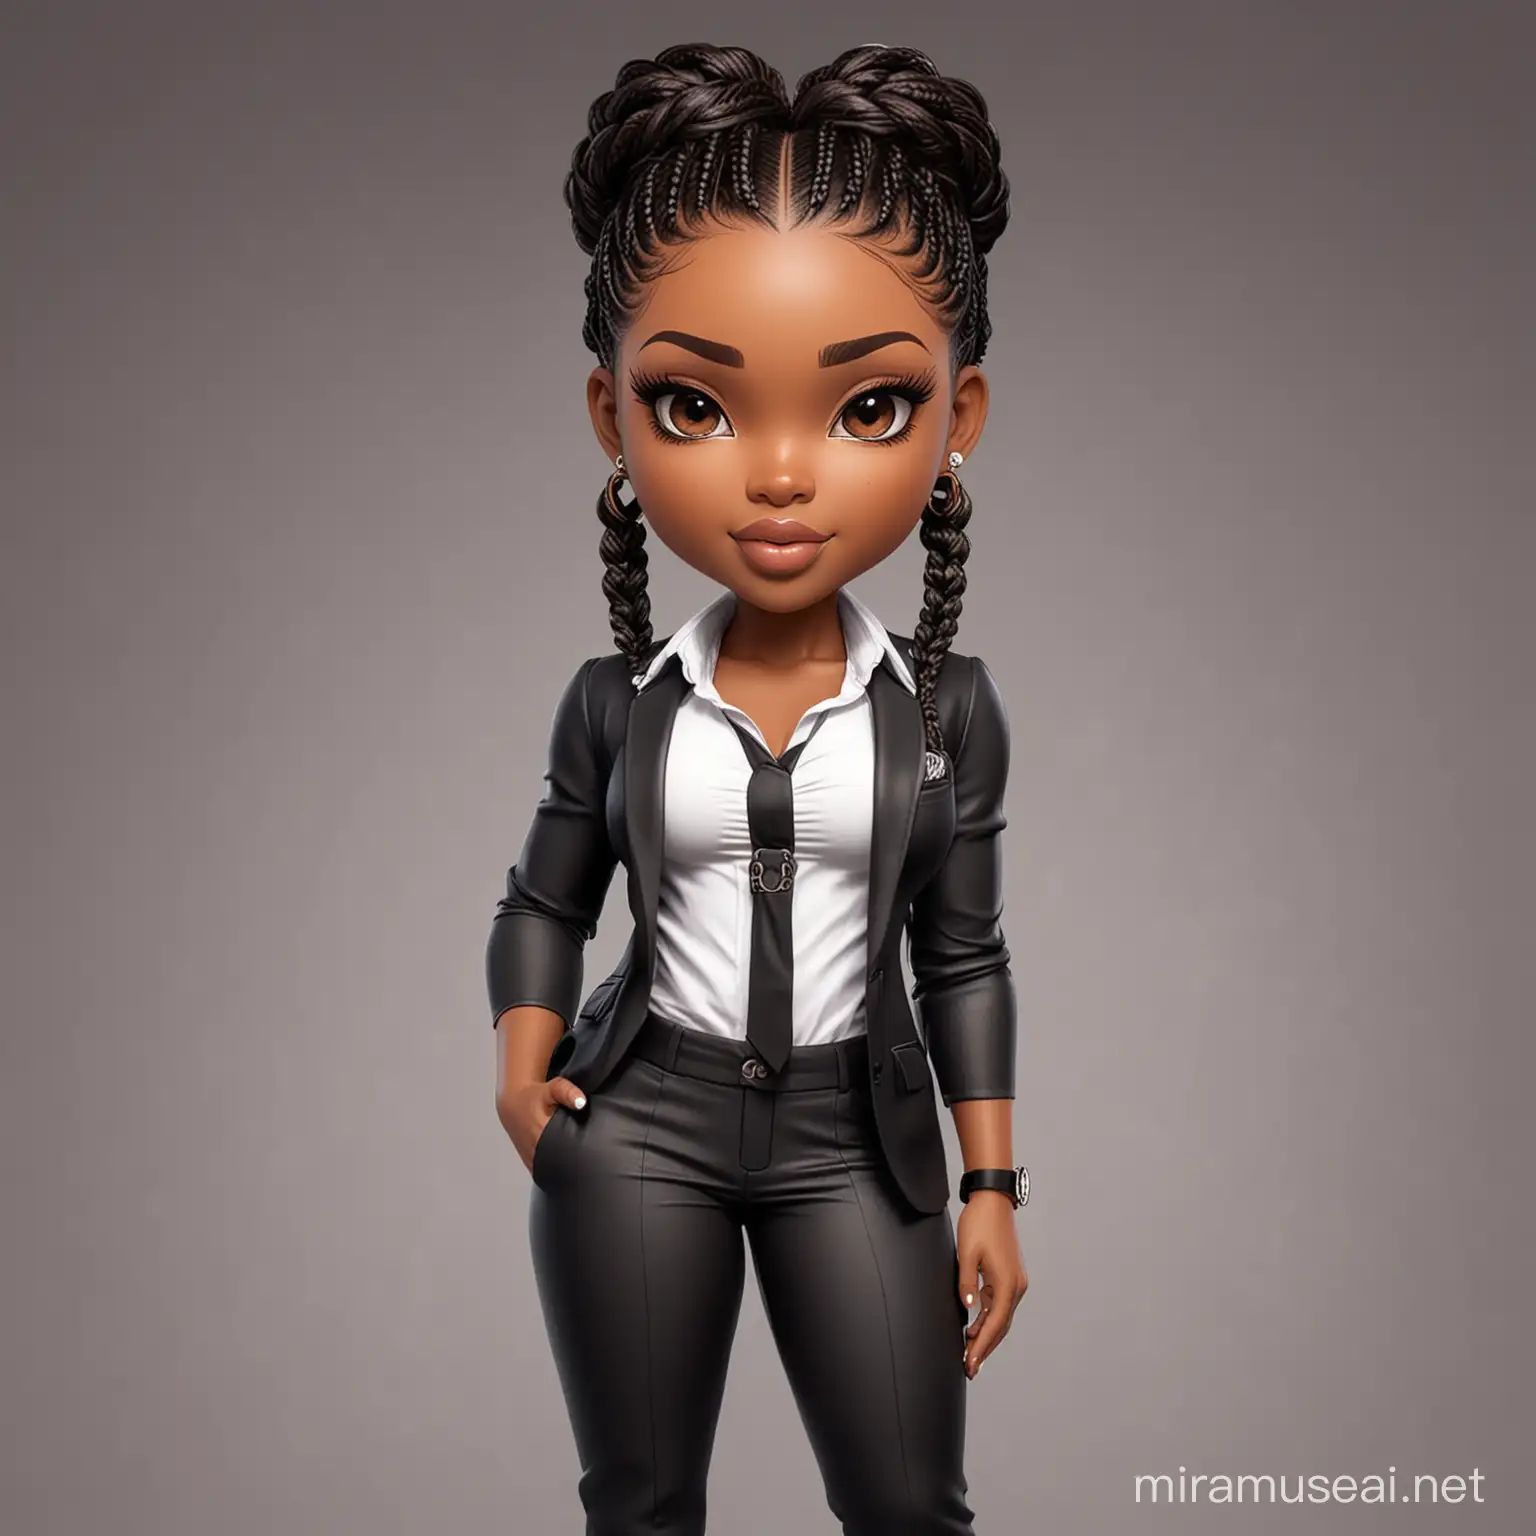 An realistic, chibi, beautiful Black woman, styled braids, boss babe, full length, dressed in luxury suit with tank top, face close up